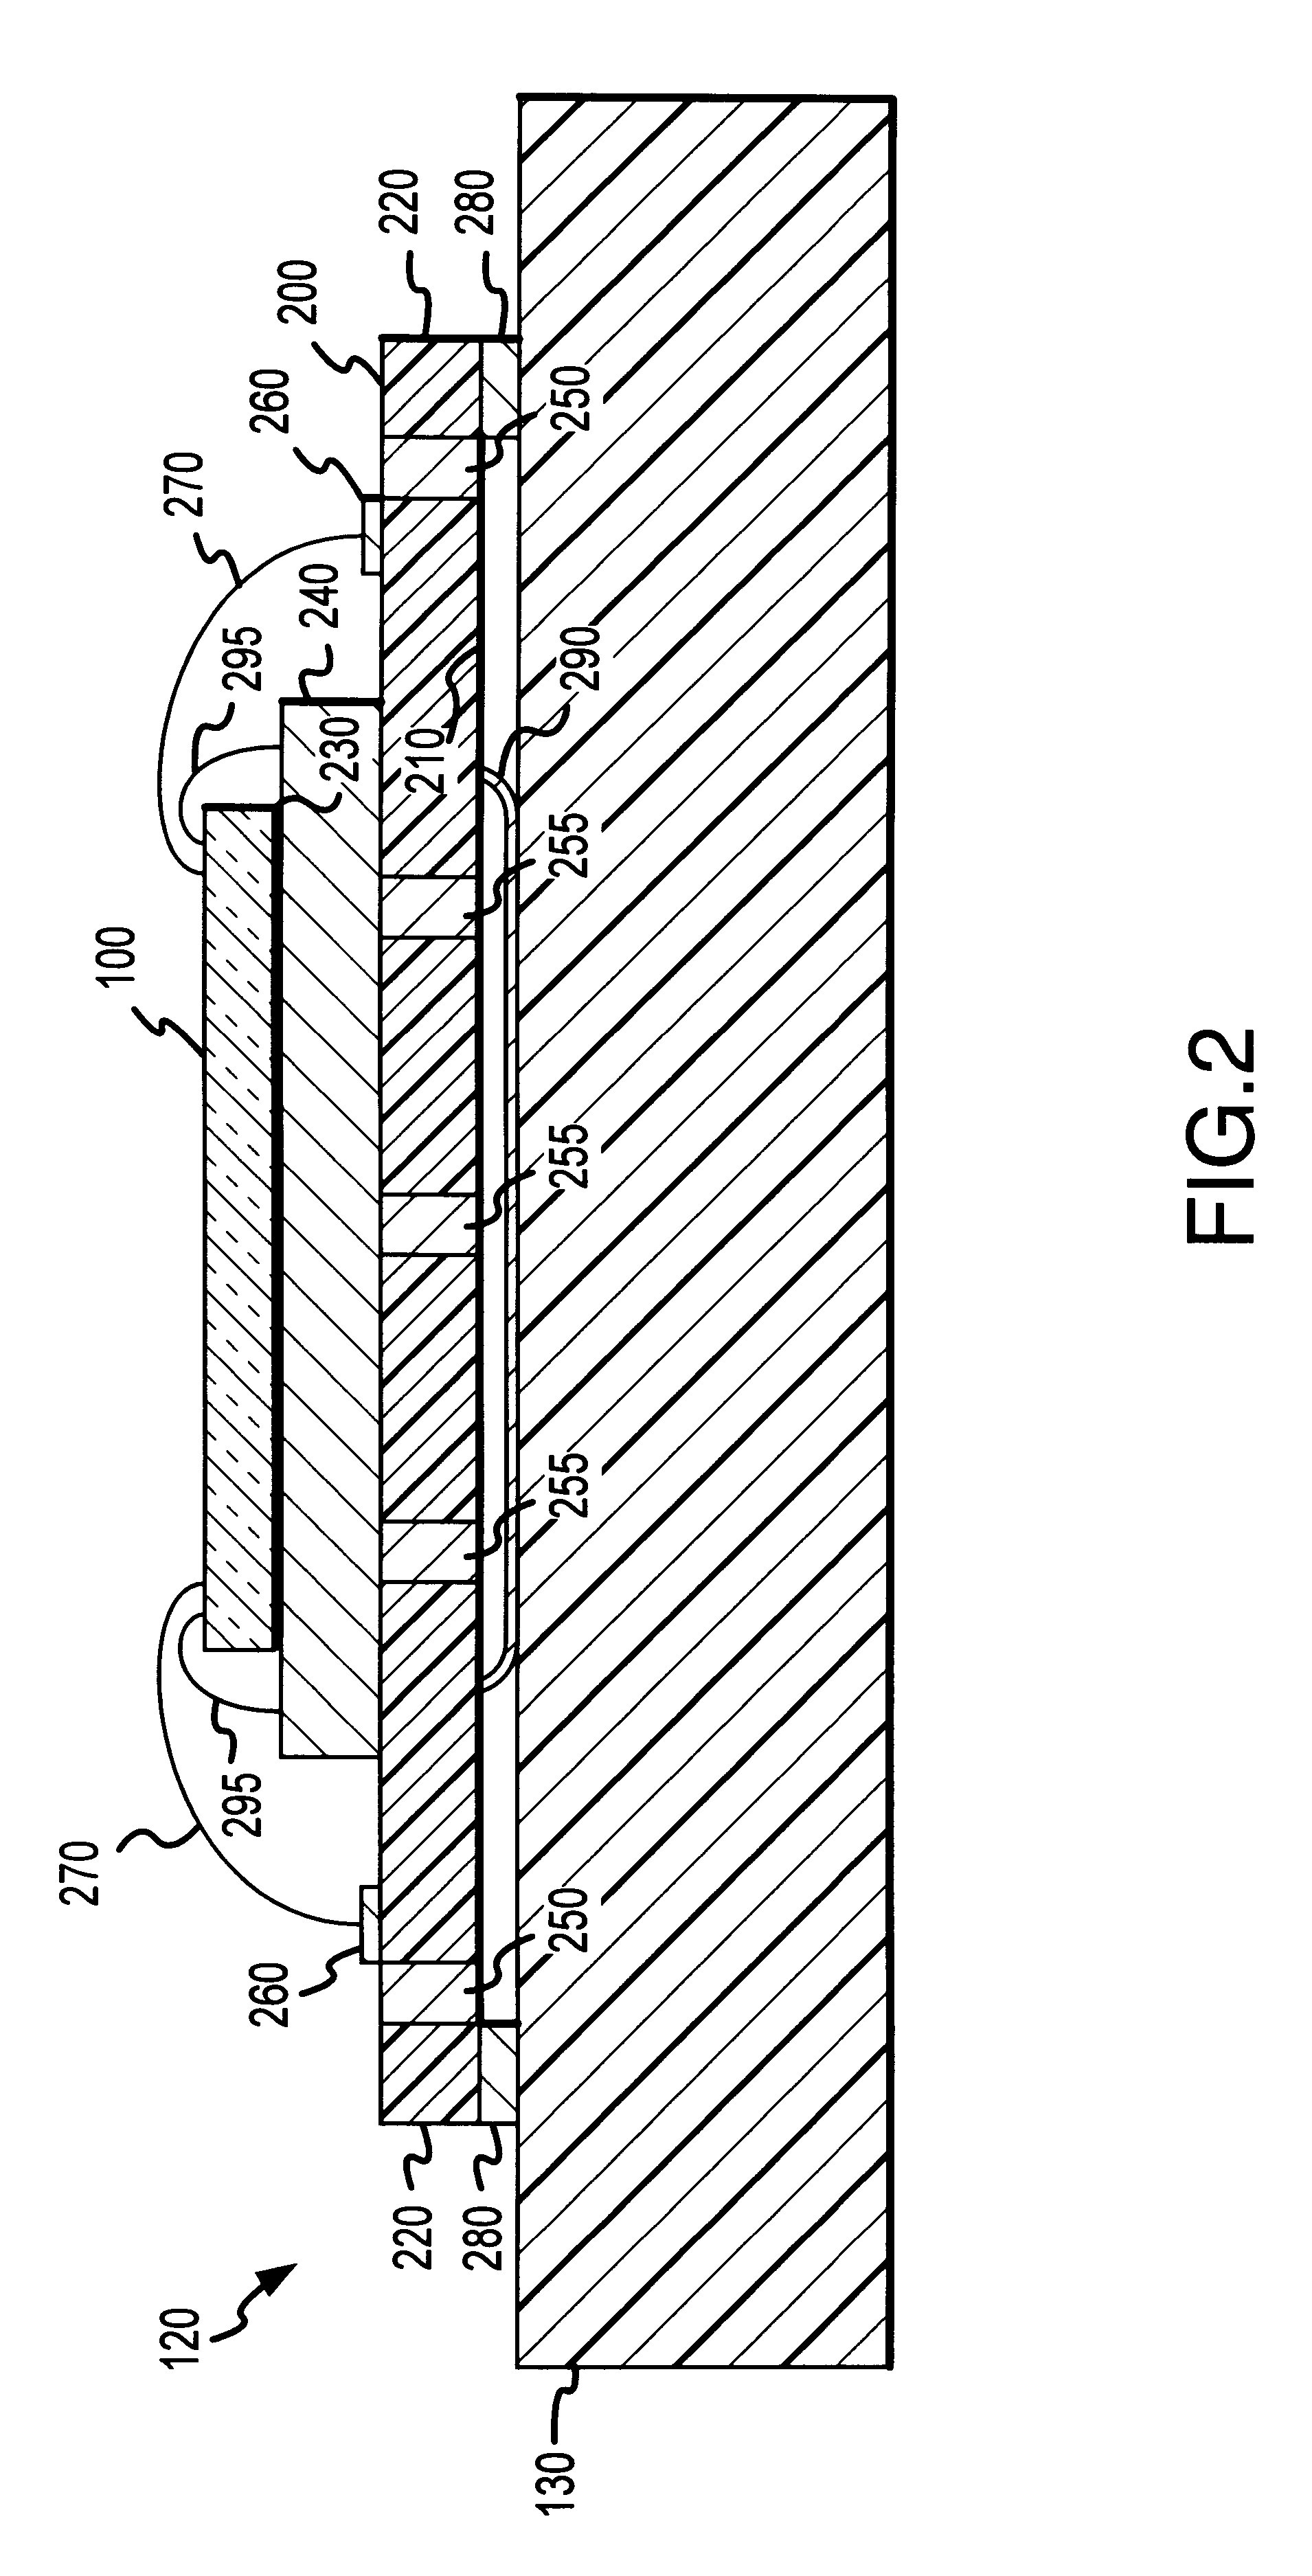 Leadless chip carrier design and structure